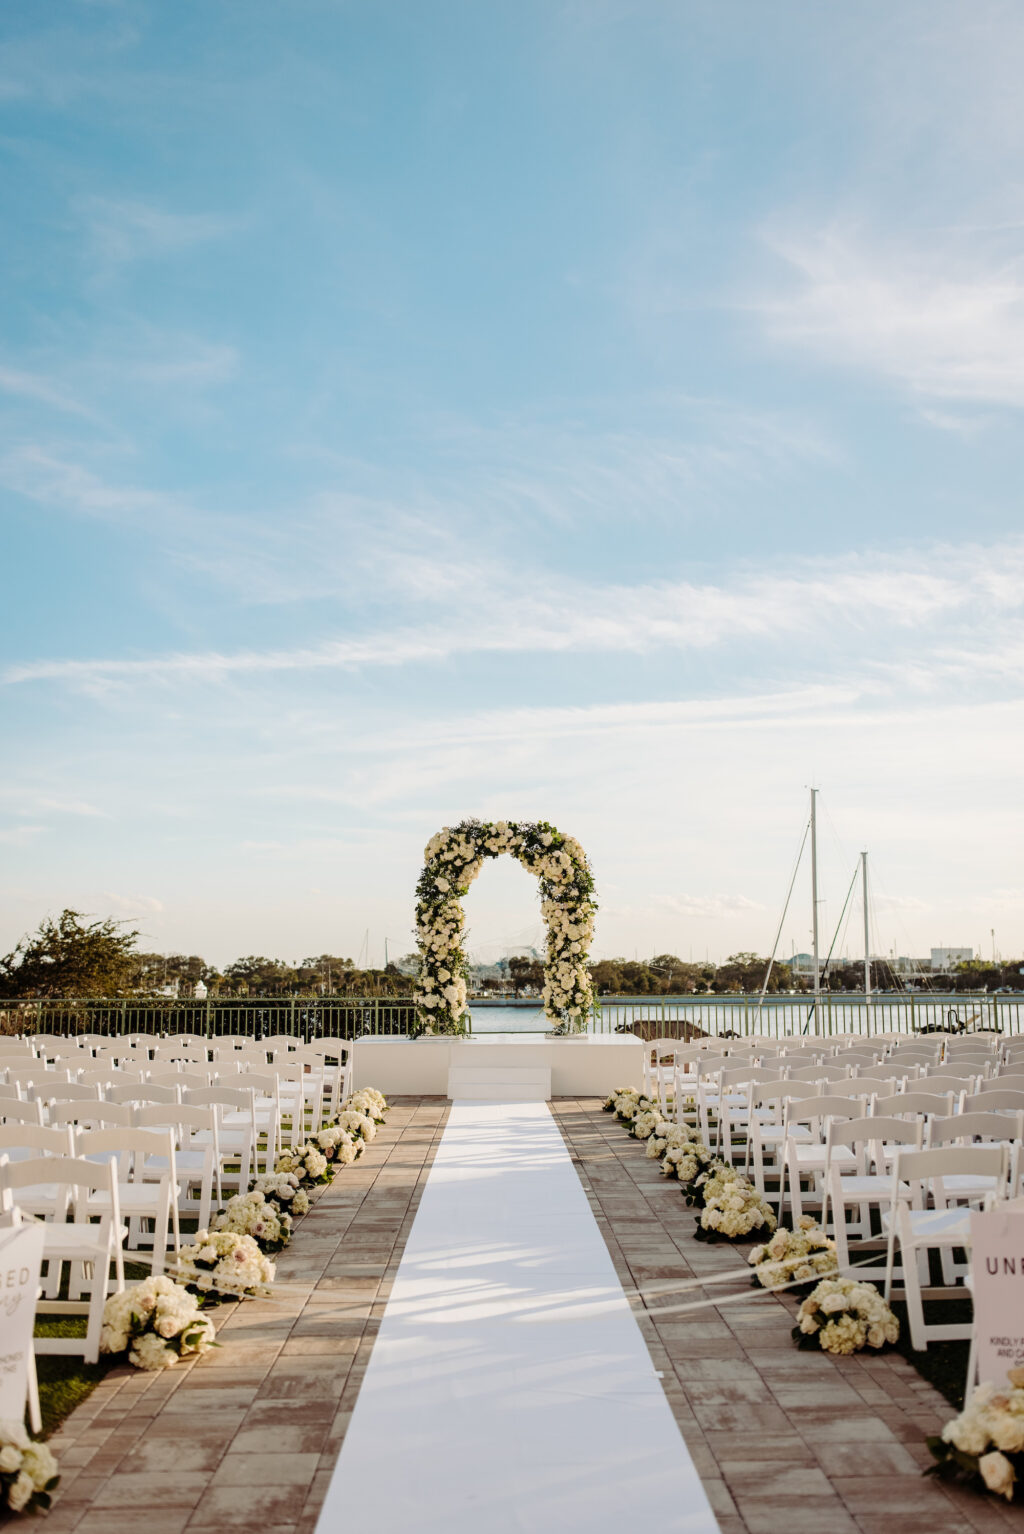 Luxurious White Rose, Hydrangeas, and Greenery Wedding Ceremony Arch with White Stage Ideas | White Aisle Runner Floral Aisle Decor Inspiration | Downtown St. Pete Venue Renaissance Vinoy